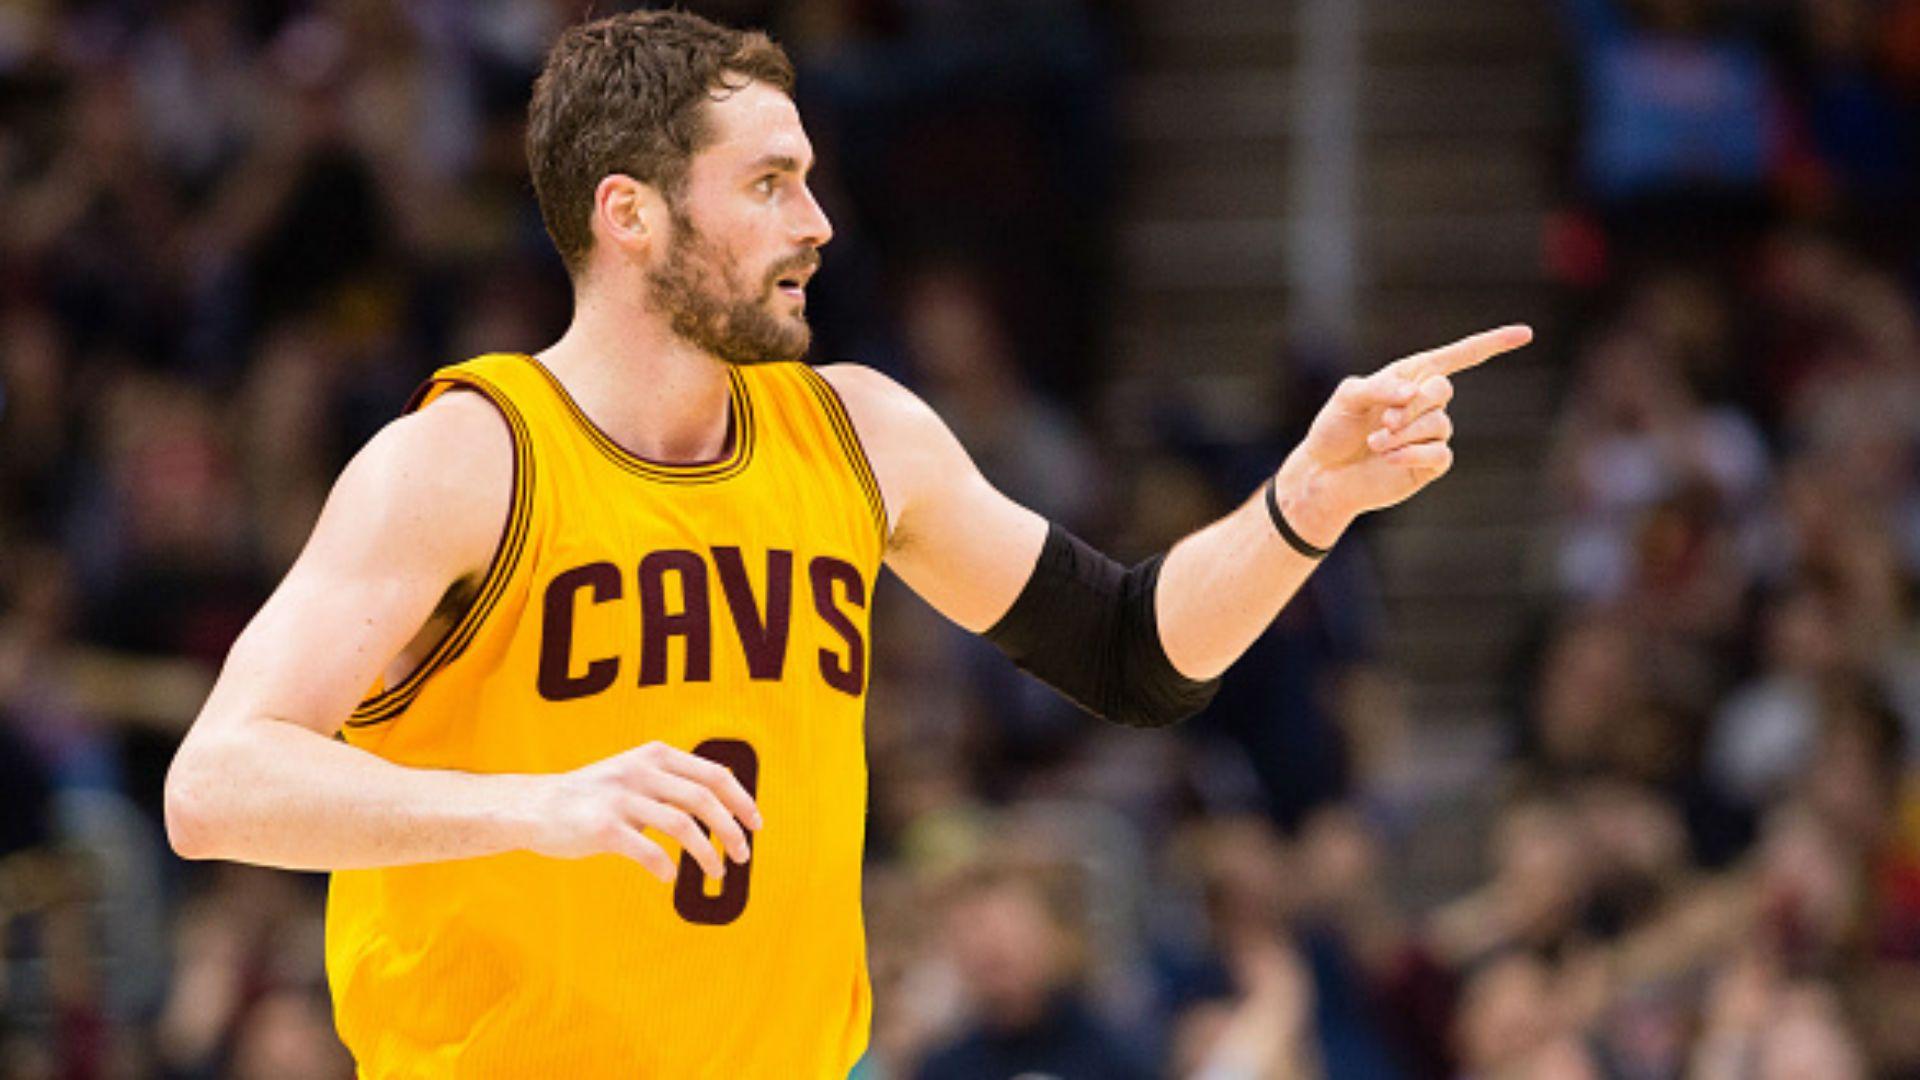 Kevin Love says Cavs' winning ways have helped with adjustment